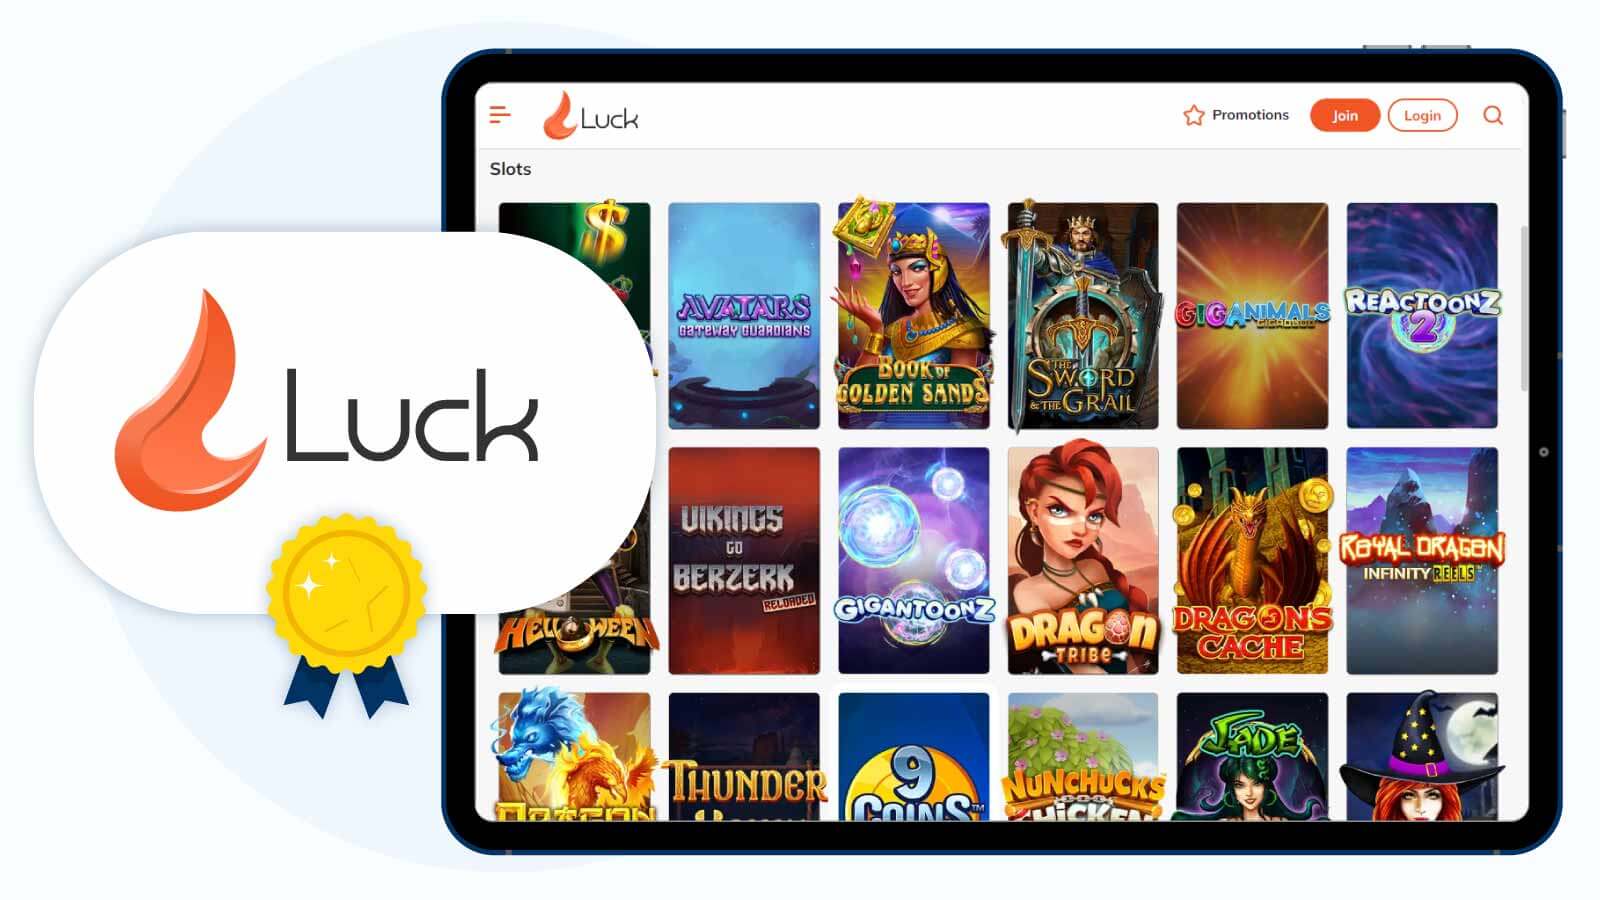 Best offer with free spins on card registration UK - 100 free spins at Luck.com Casino